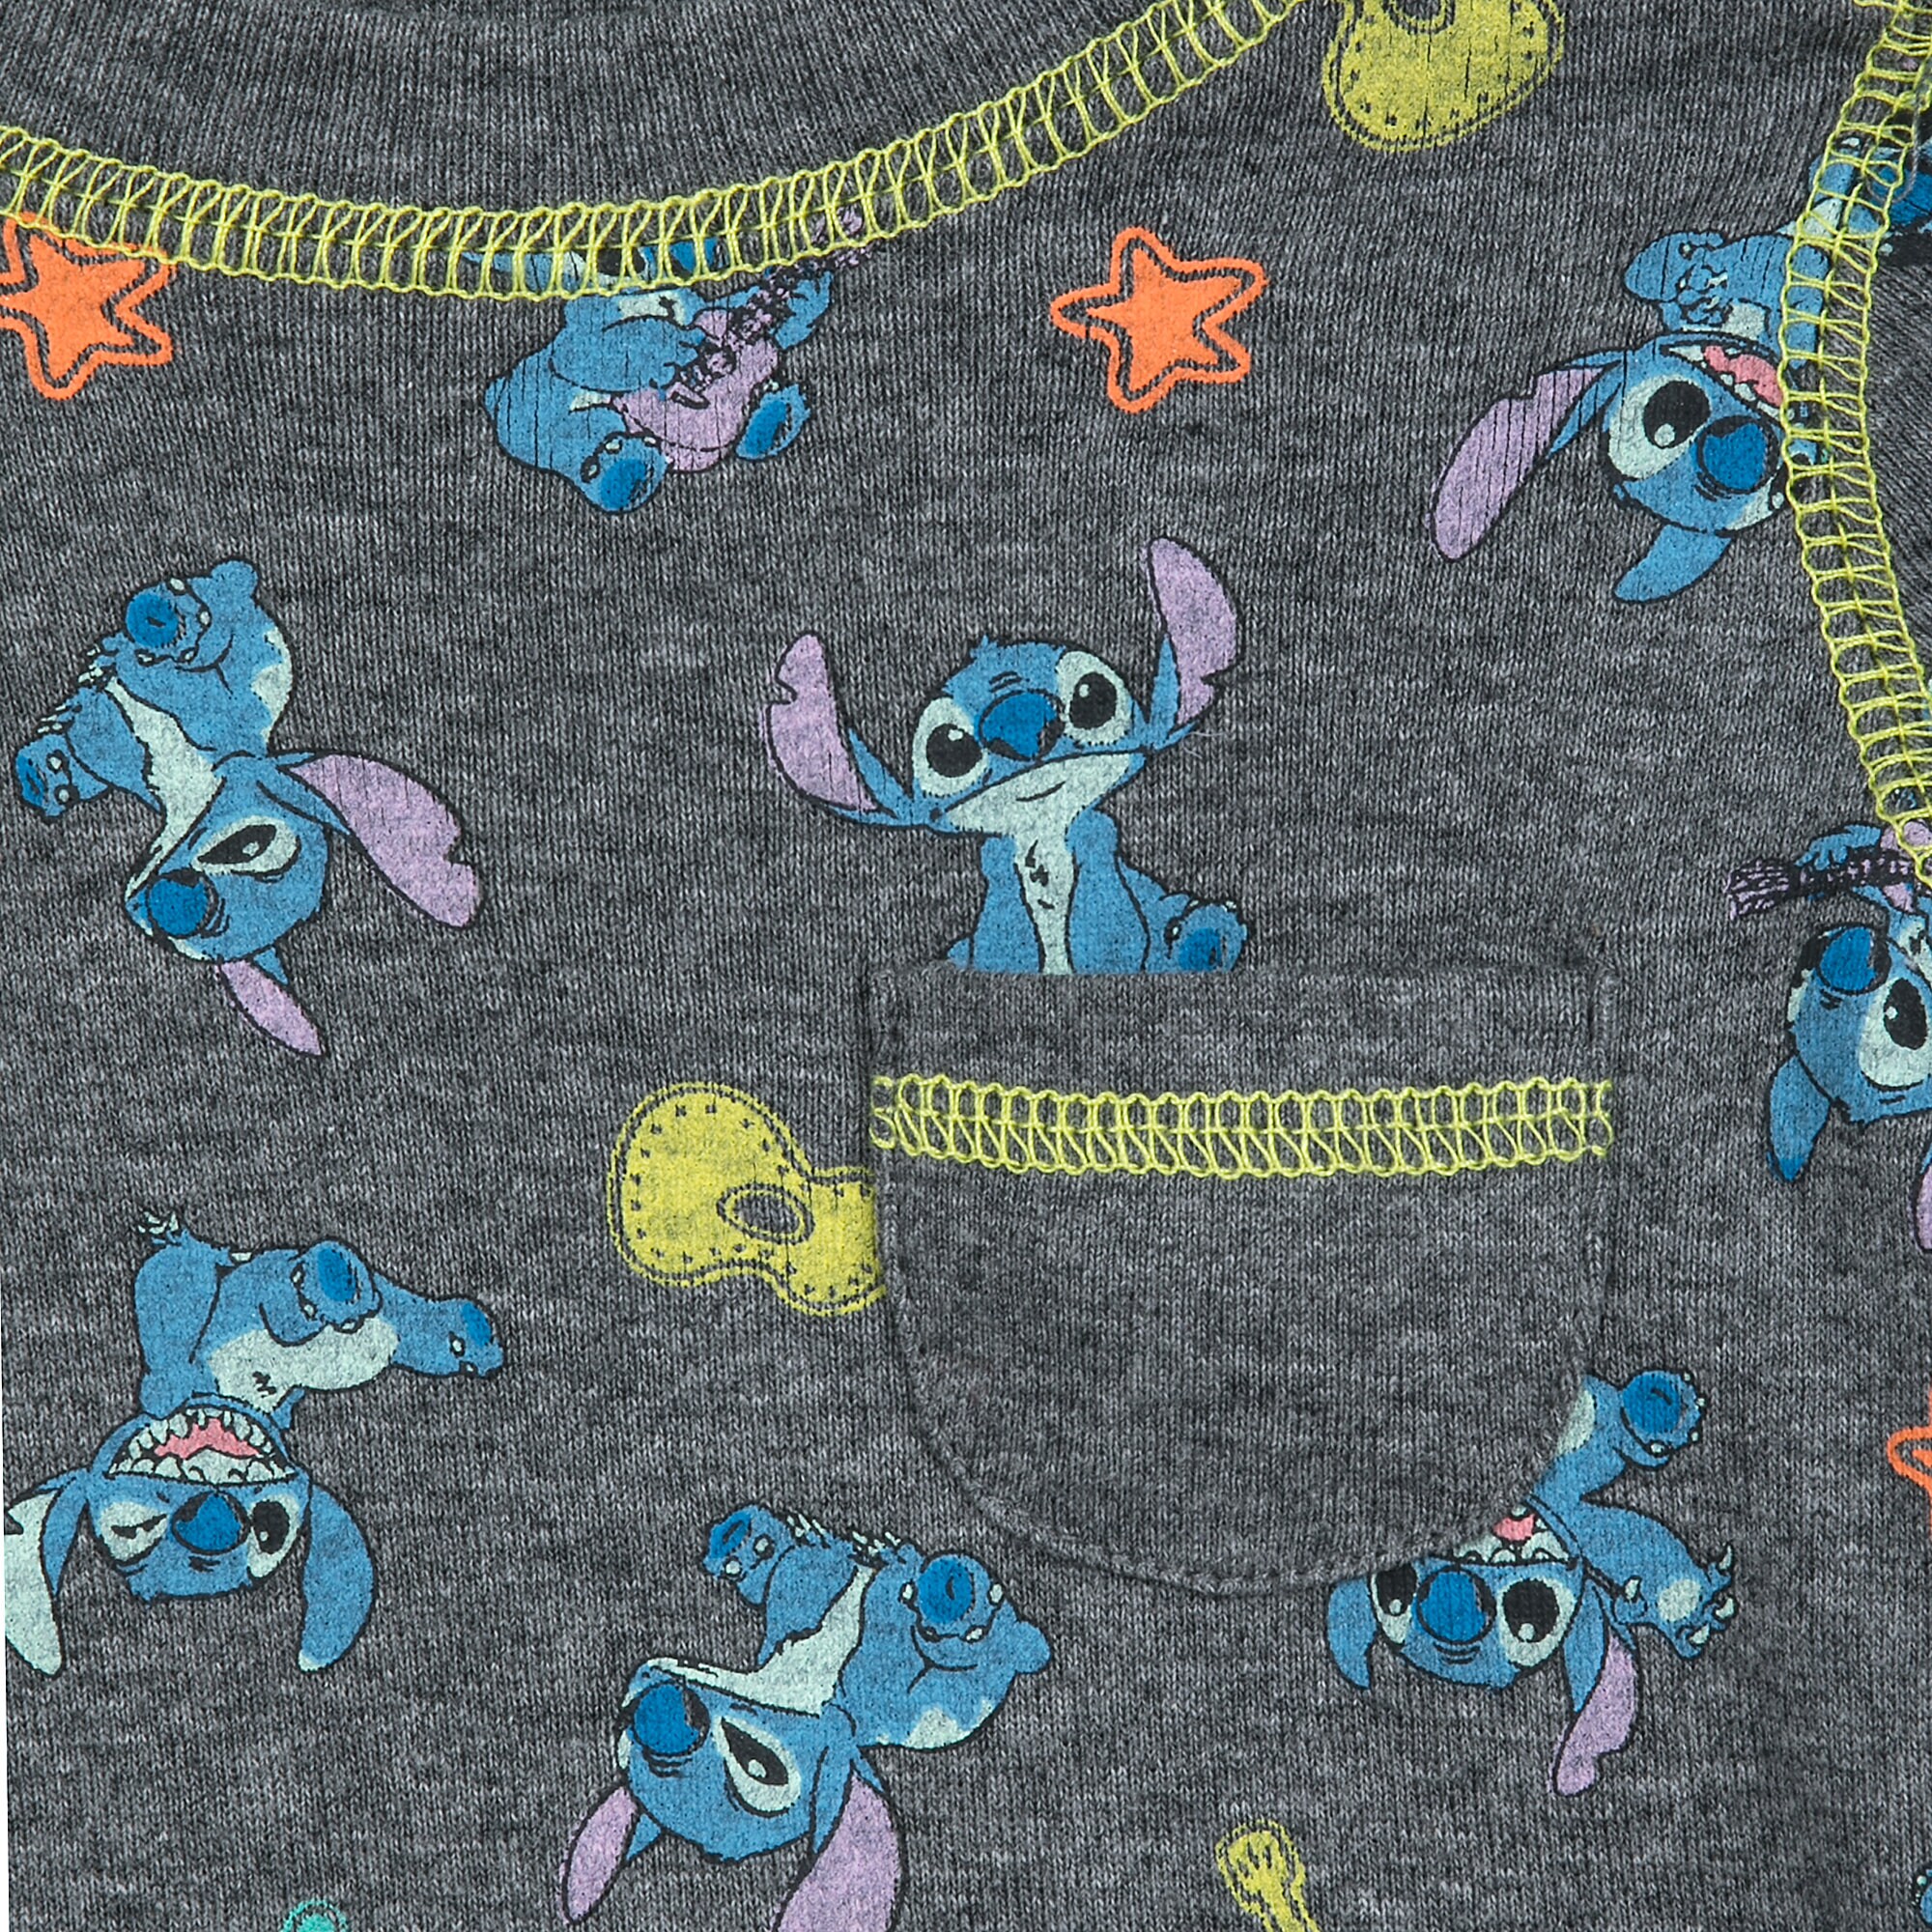 Stitch Long Sleeve Bodysuit for Baby